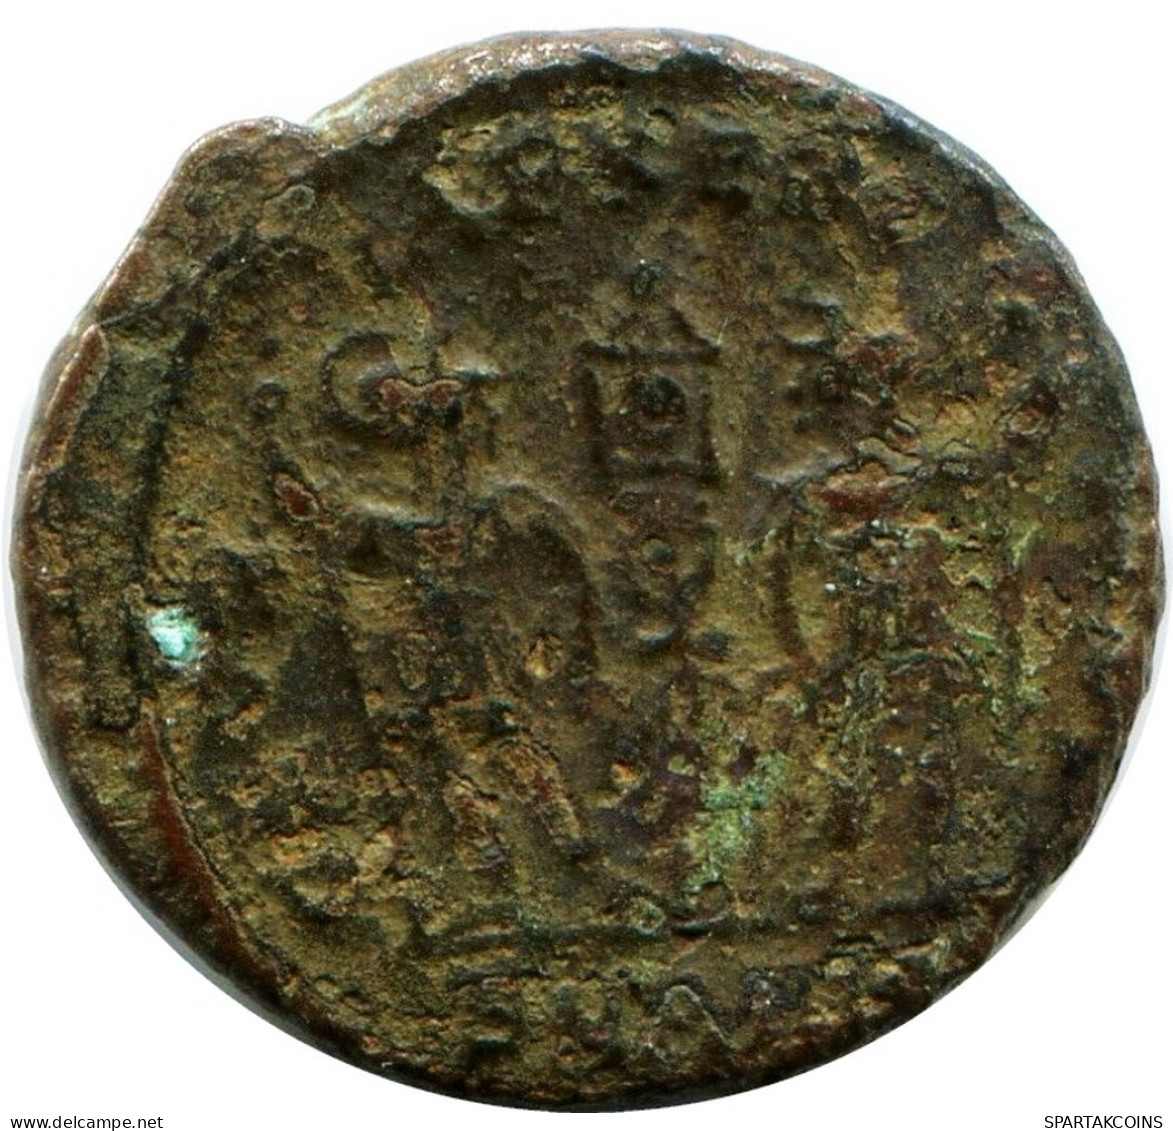 CONSTANS MINTED IN ANTIOCH FOUND IN IHNASYAH HOARD EGYPT #ANC11833.14.U.A - El Imperio Christiano (307 / 363)